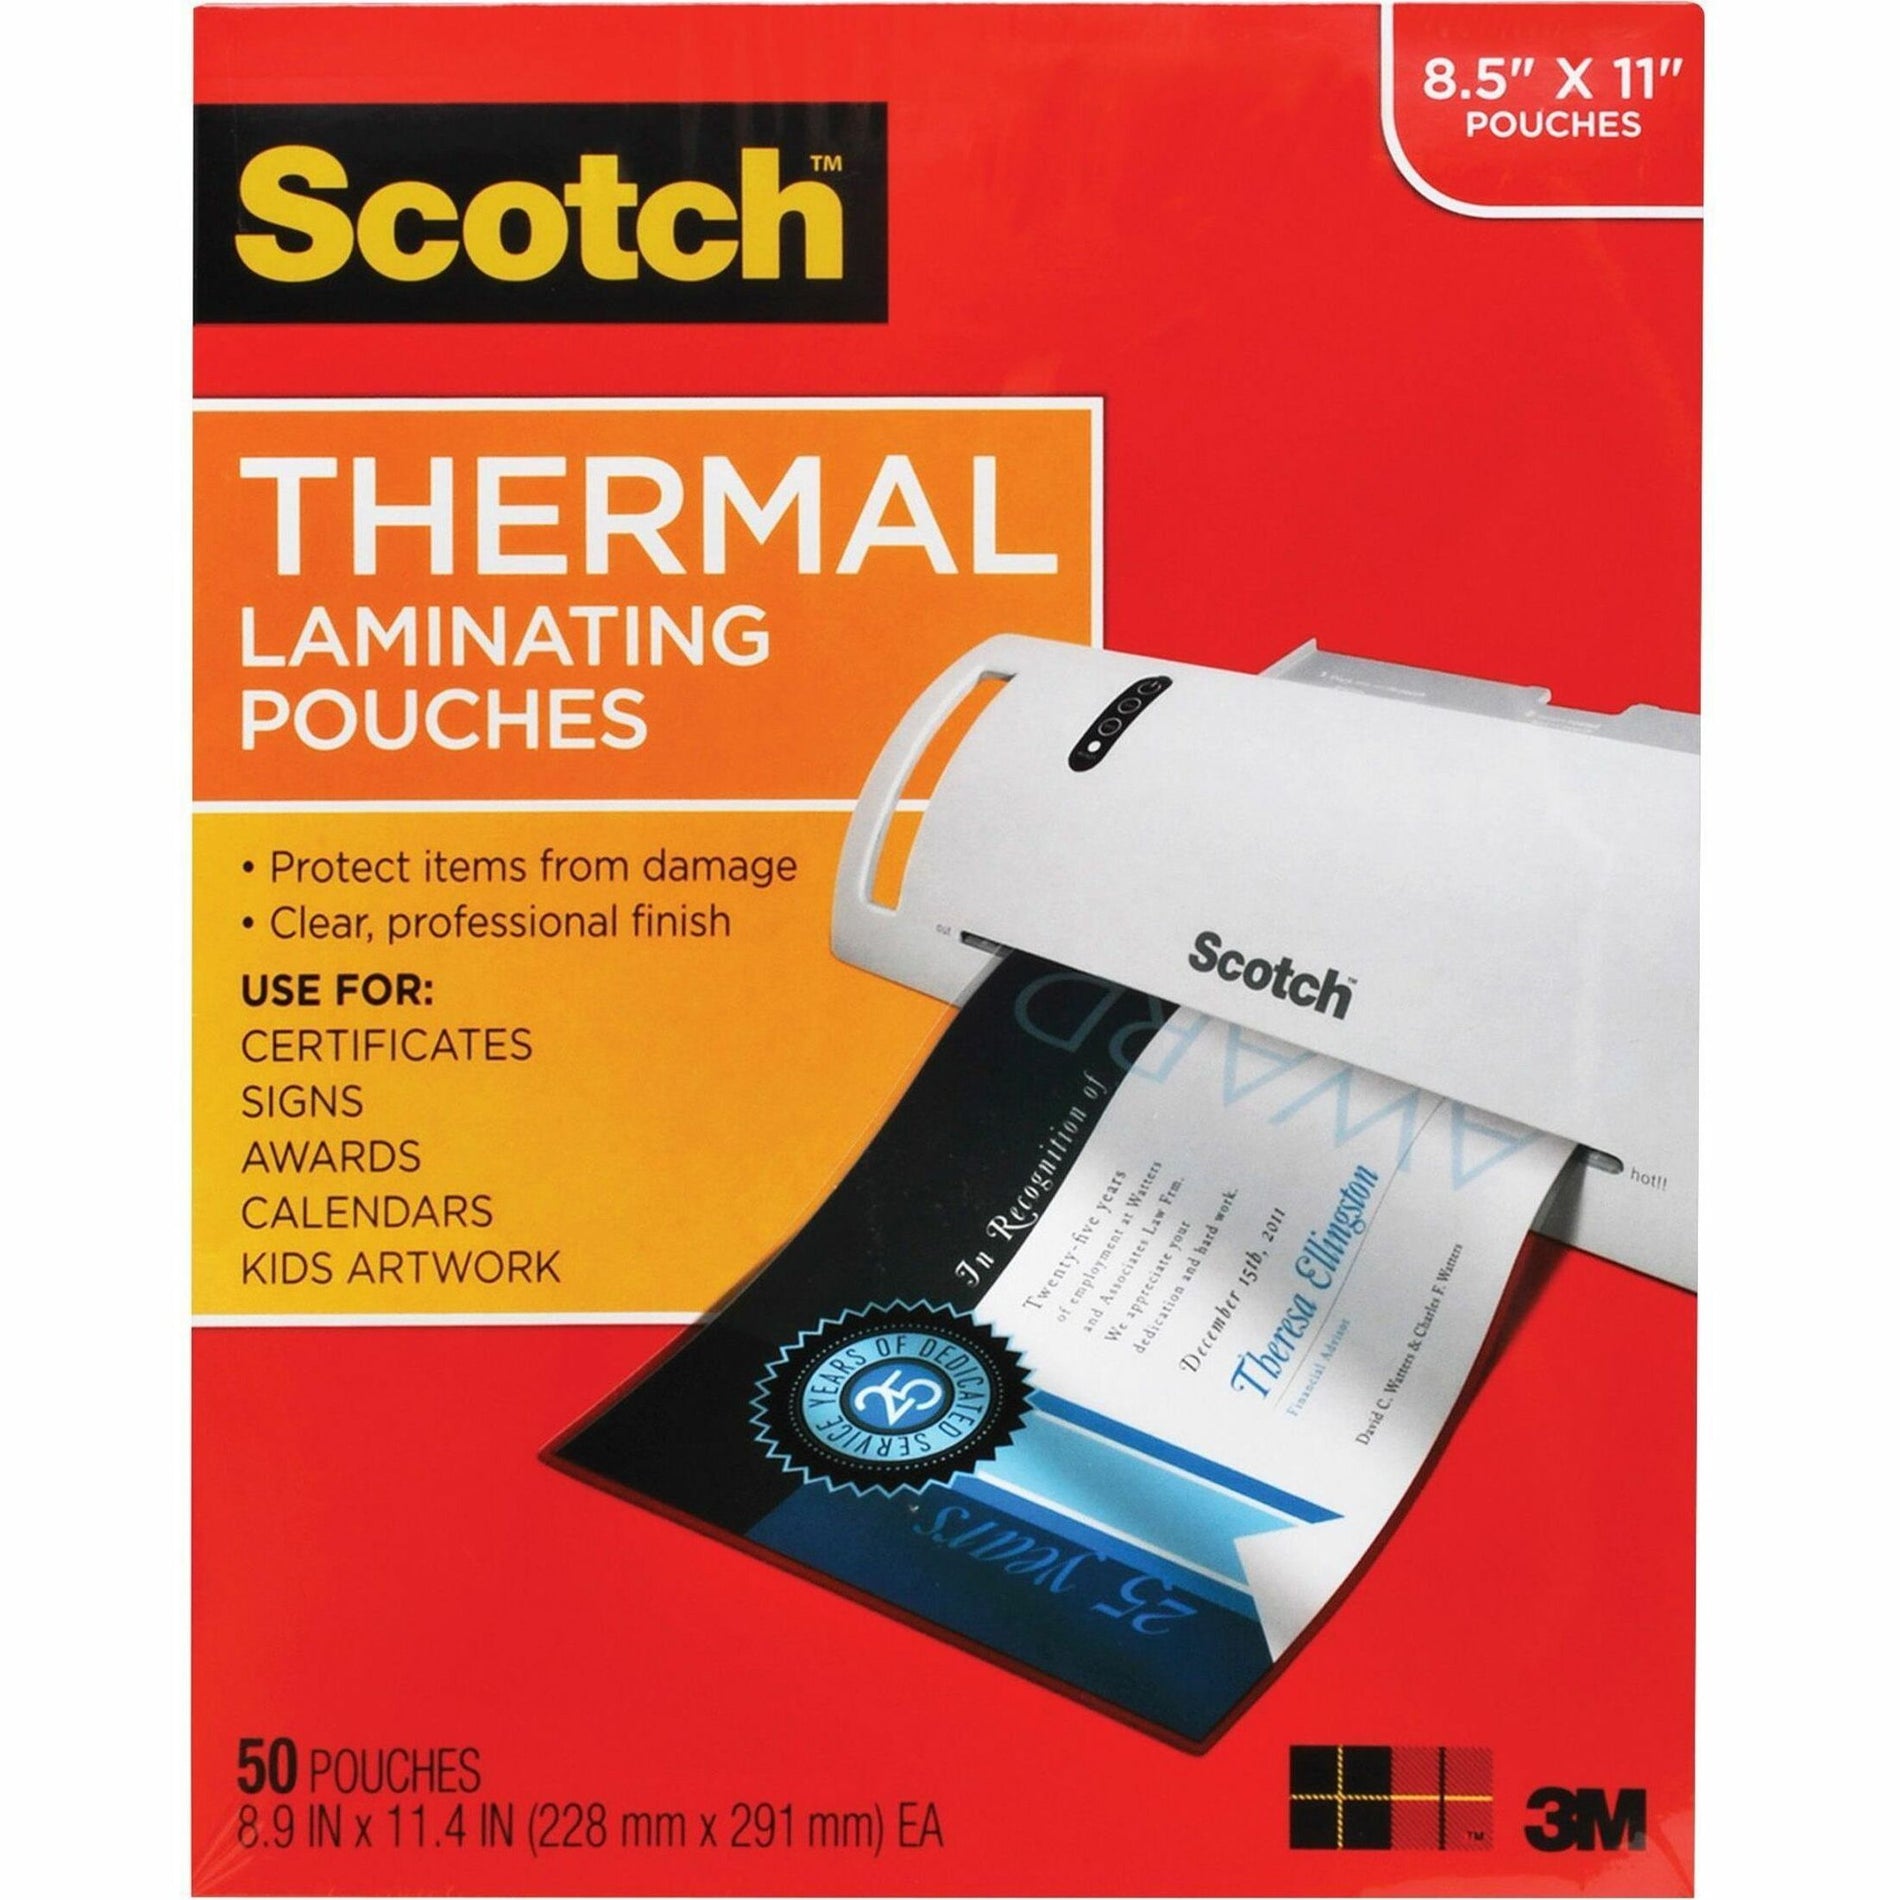 Scotch TP385450 Thermal Laminating Pouches, Ltr, 11-1/2"x9", 50/PK, Clear